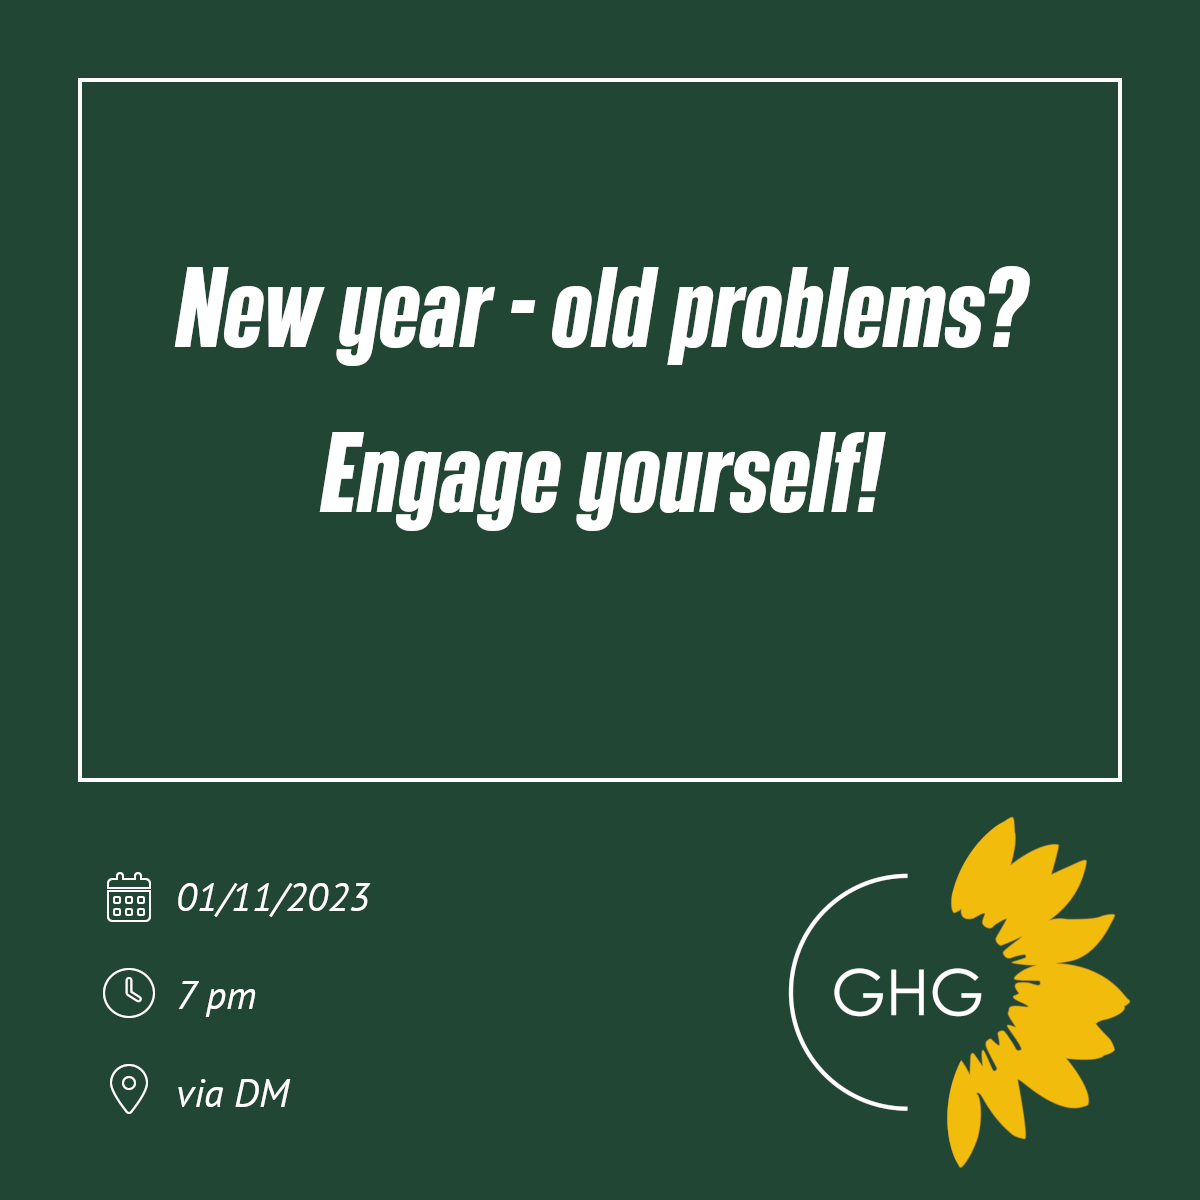 New year – old problems? Engage yourself!